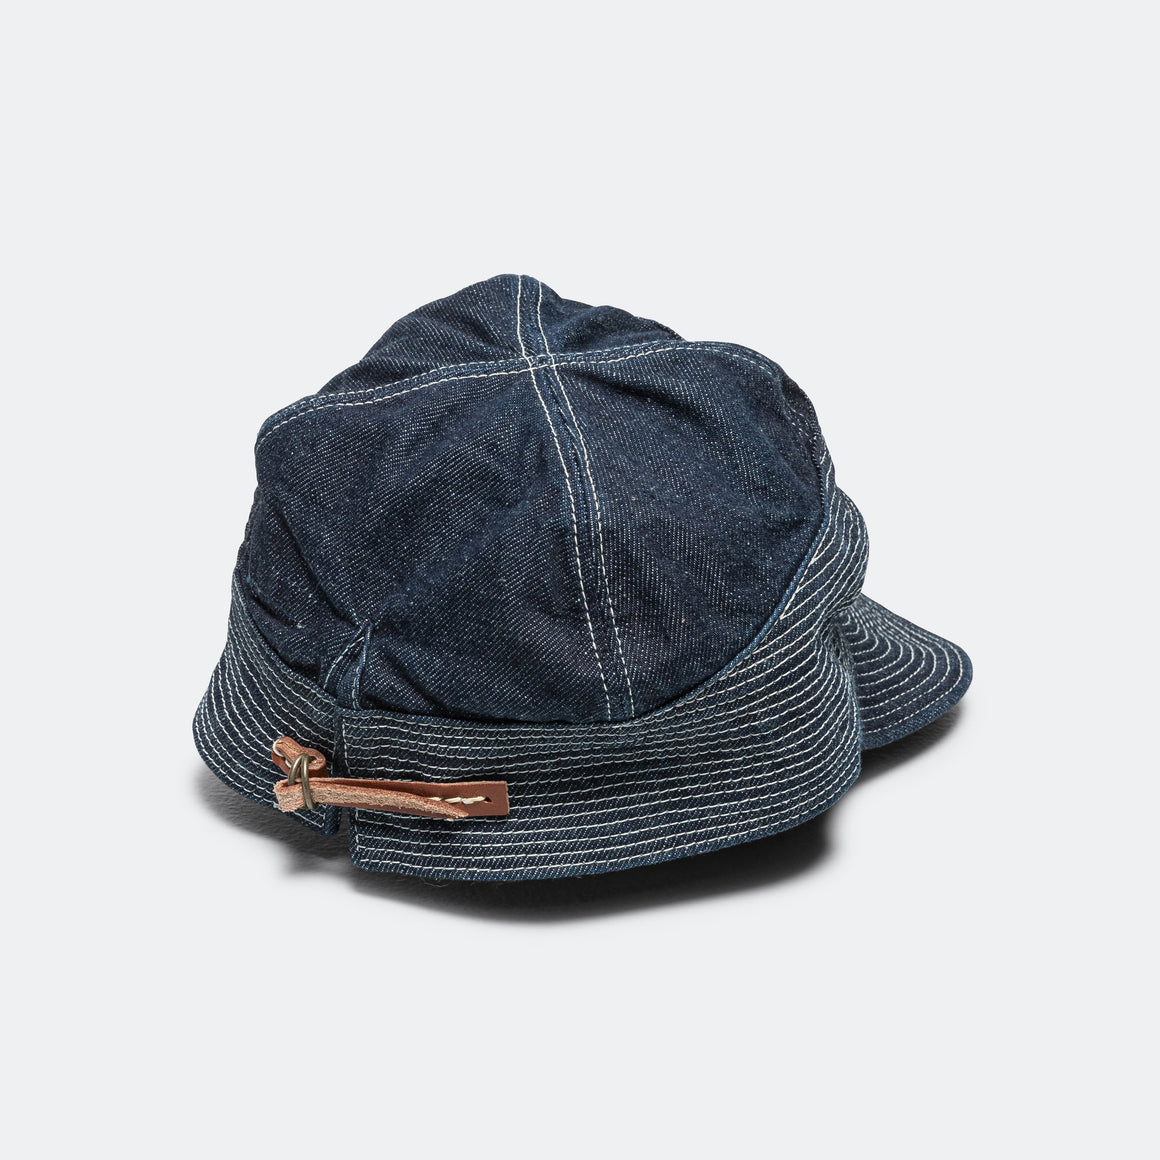 Kapital - 11.5oz Denim THE OLD MAN AND THE SEA Cap - Dark - UP THERE